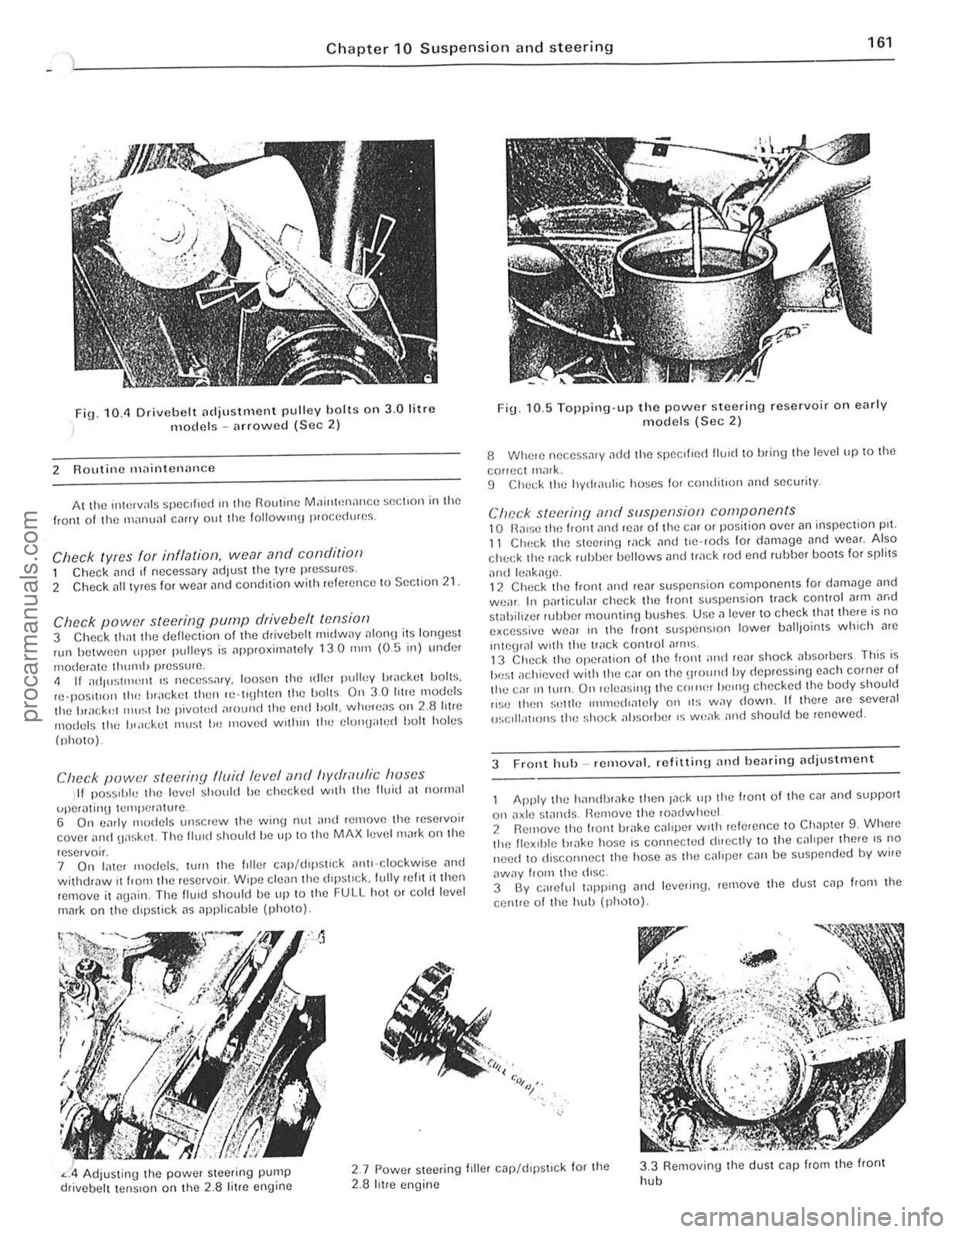 FORD CAPRI 1974  Workshop Manual Chapter 10 Suspension and steering 161 
fig. 10.11 Drivebelt [ldjustlllent pulley holts on 3.0 litre models -arrowed (Sec 2) 
2 Routine maintenance 
At the "*,vals spec ,f,ed  III the Routine MainhHl